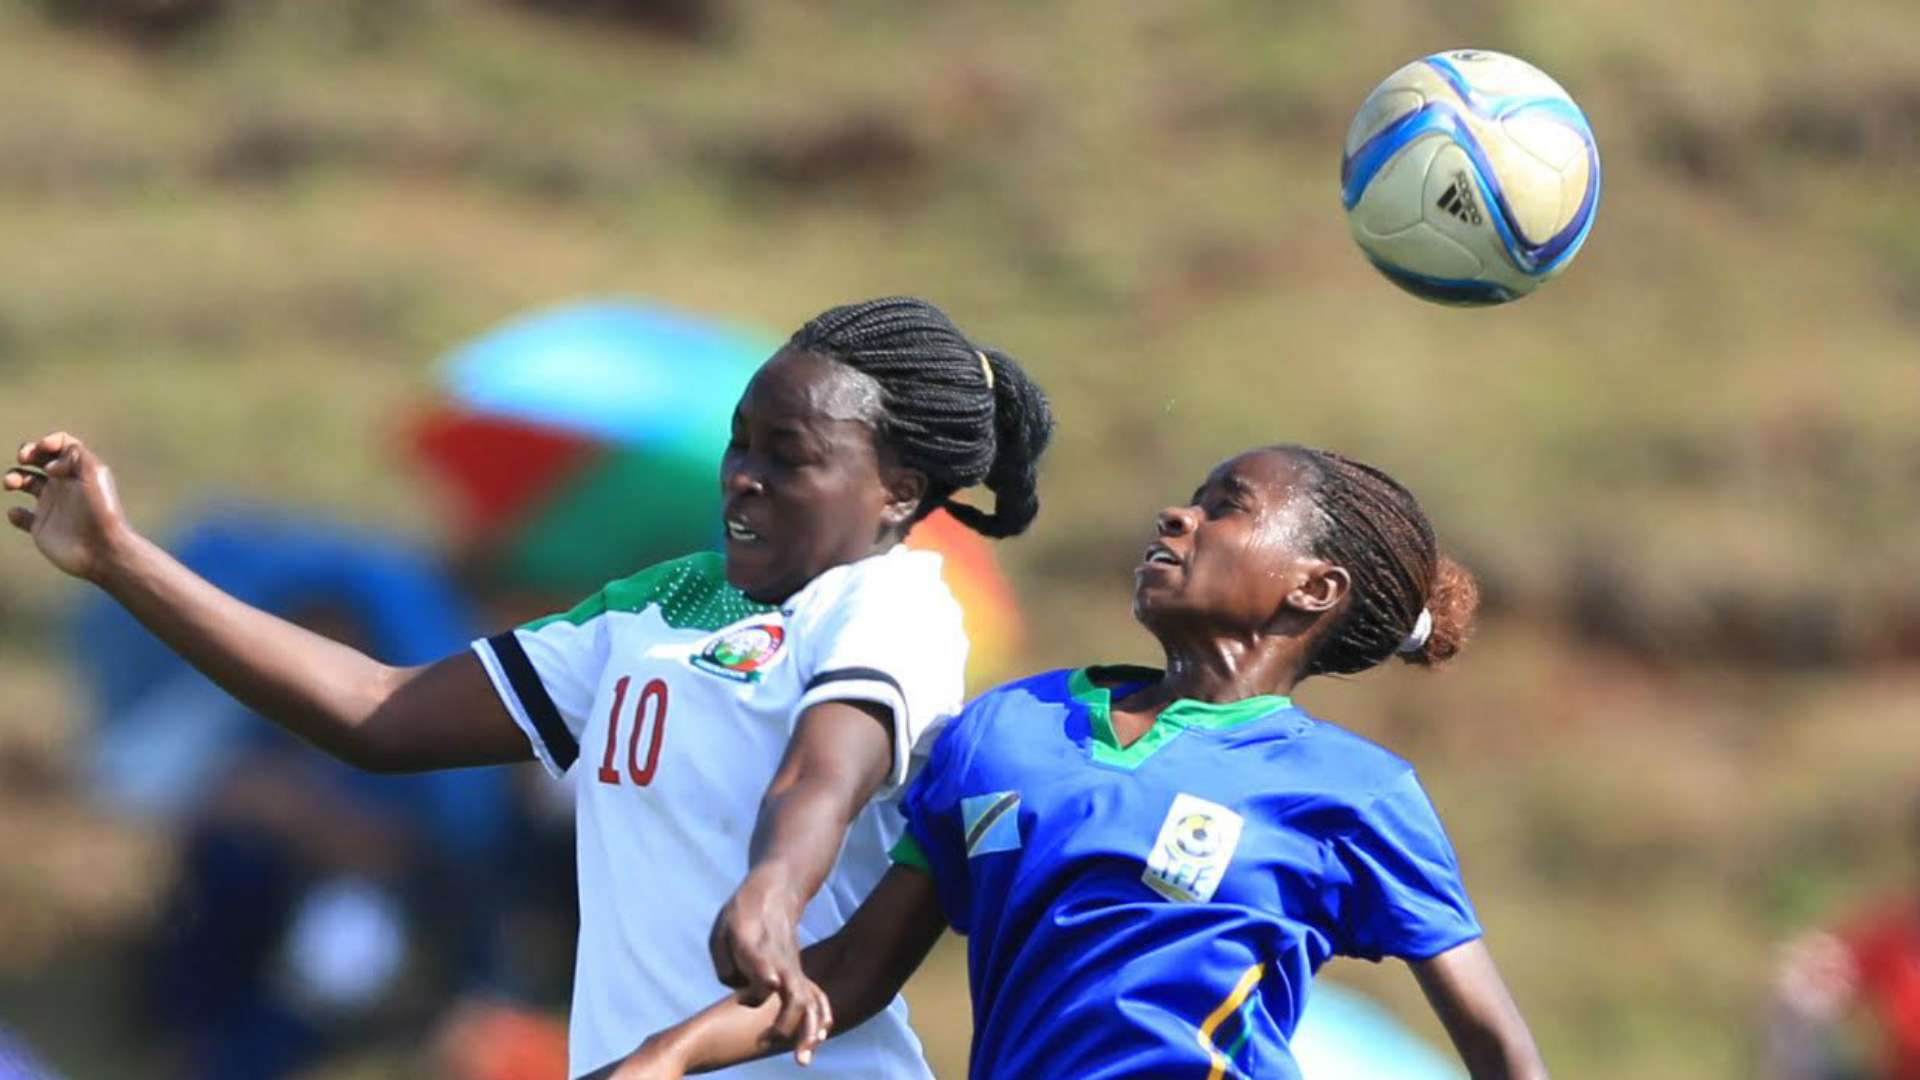 Harambee Starlets went into the final as favourites having won all their matches from Group stage